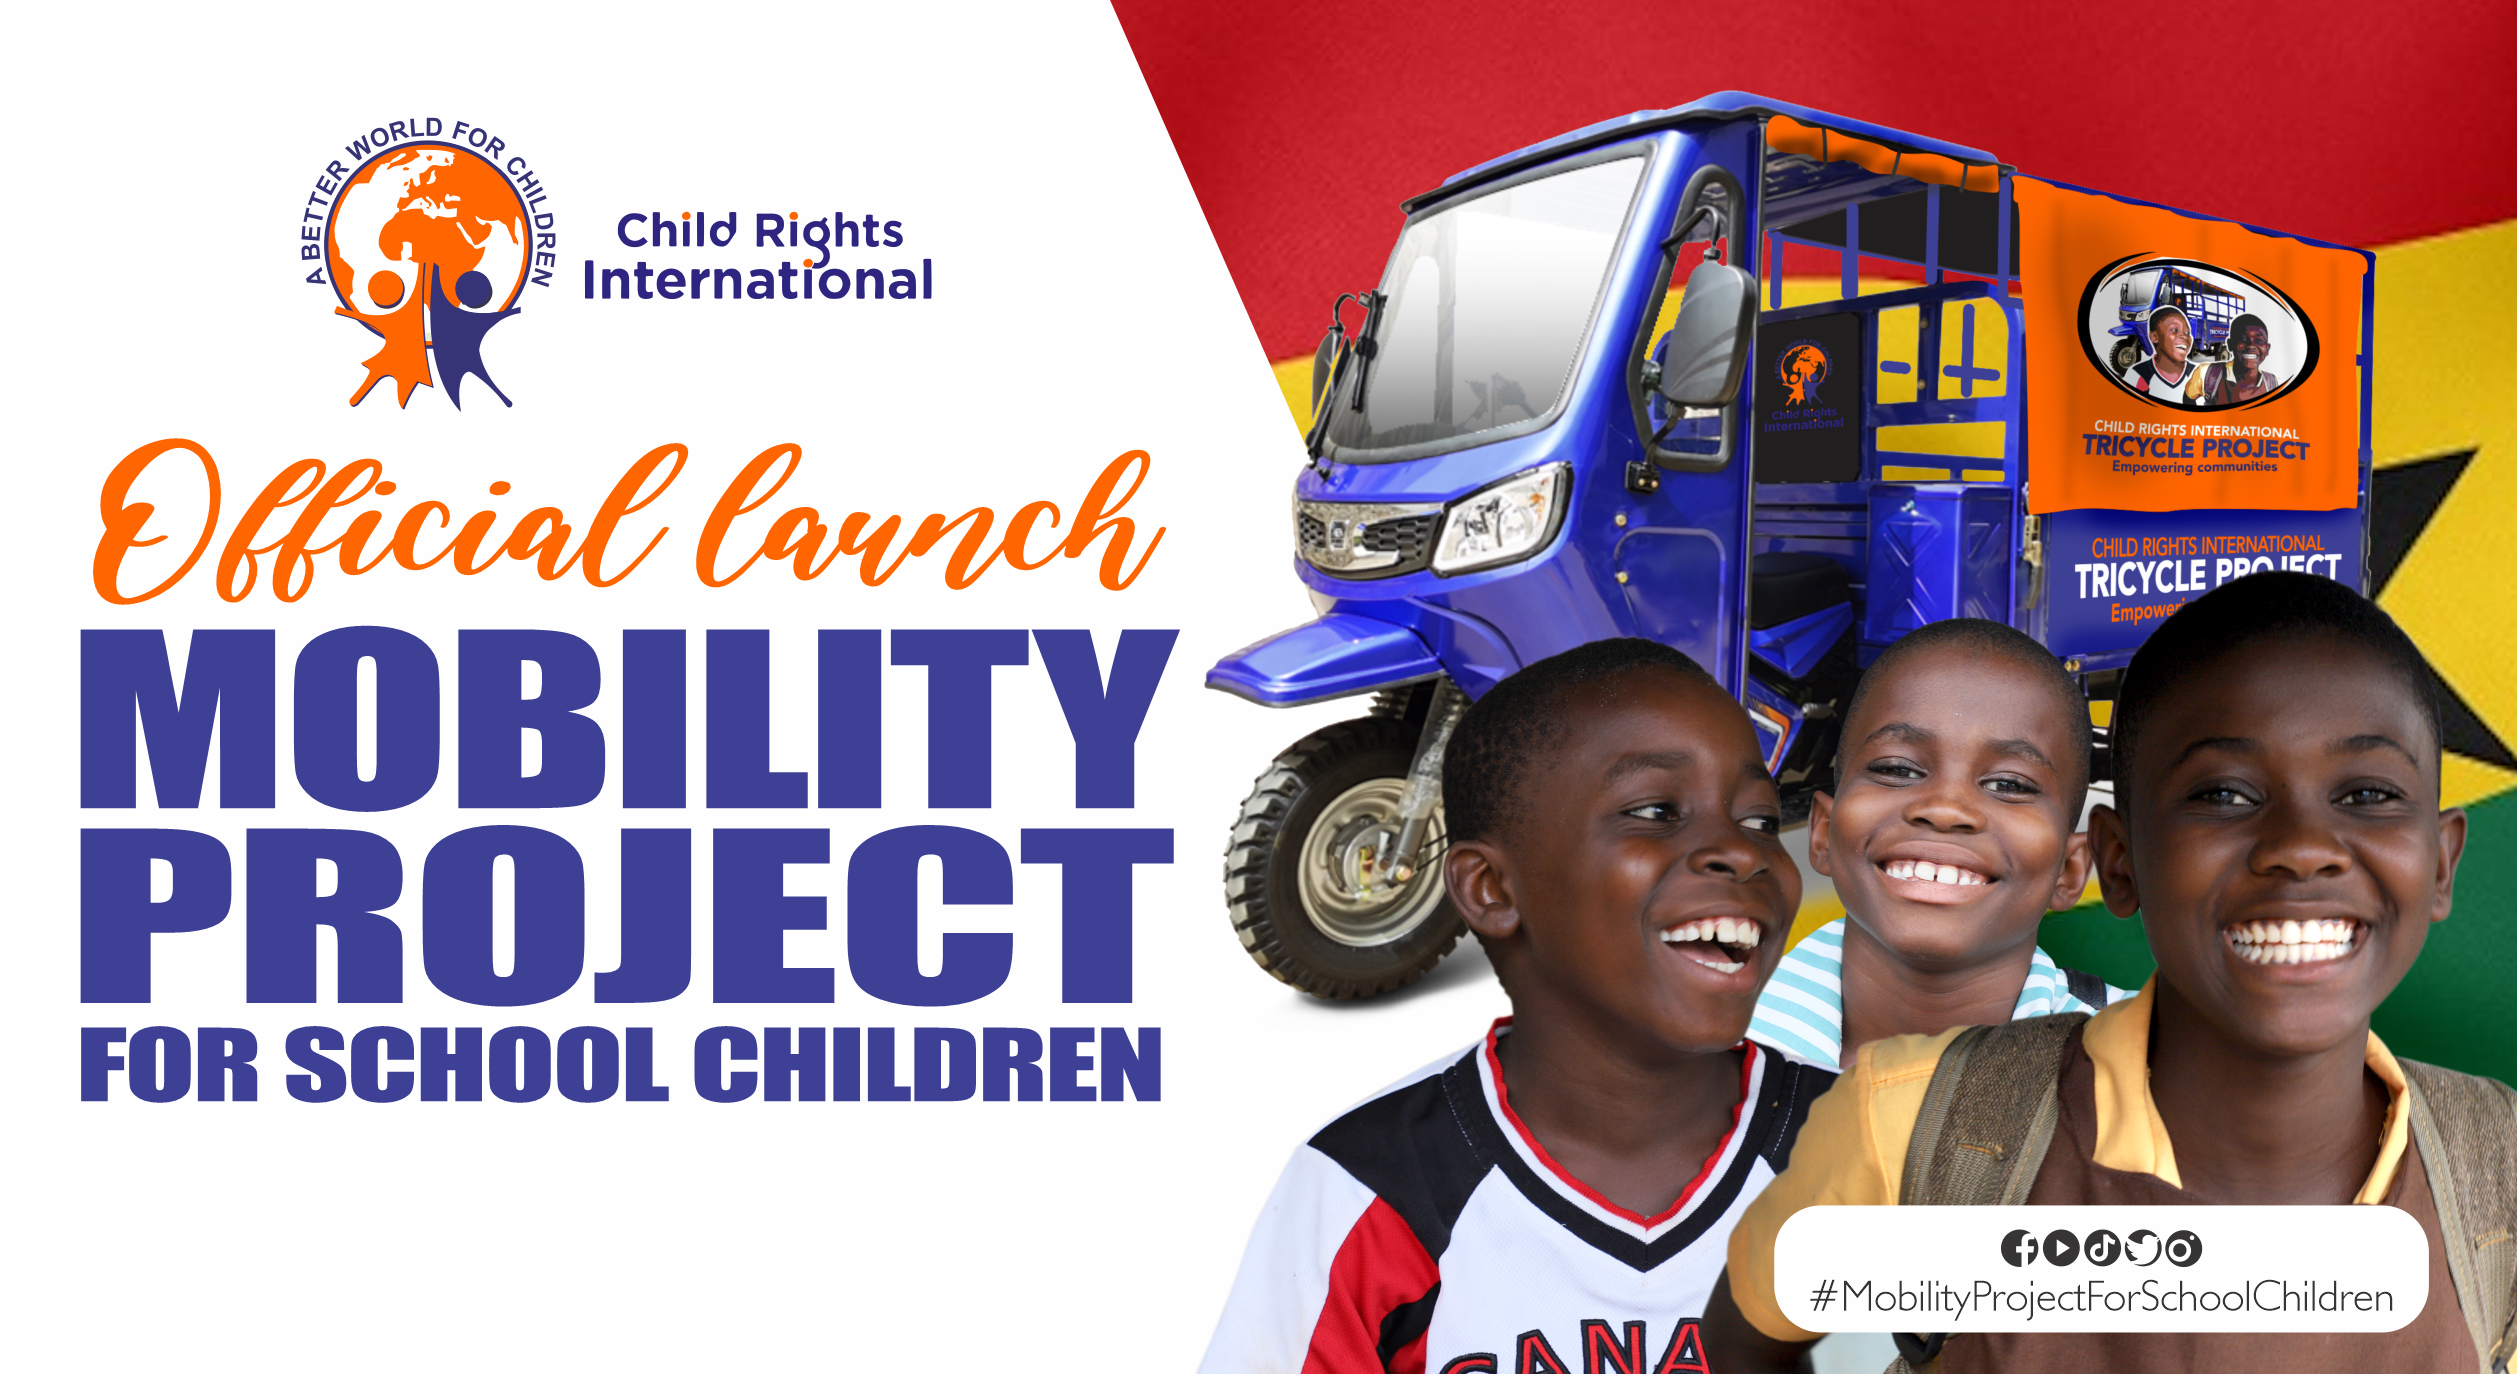 CHILD RIGHTS INTERNATIONAL TO LAUNCH MOBILITY PROJECT